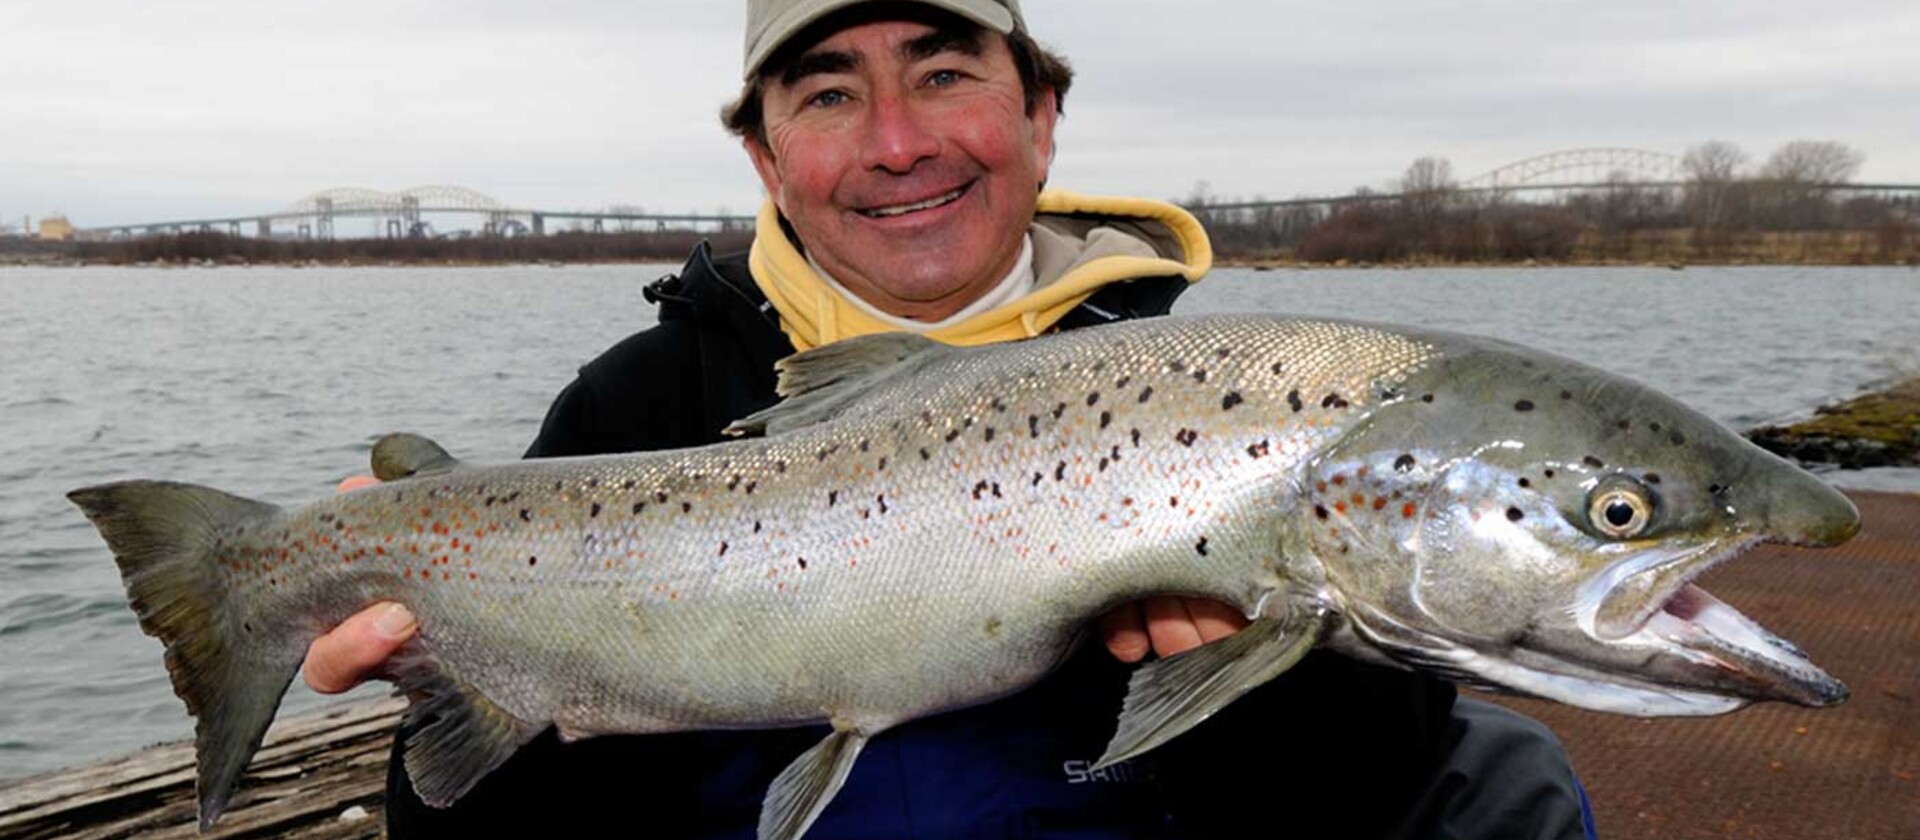 Algoma Chrome: Fishing for Trout and Salmon